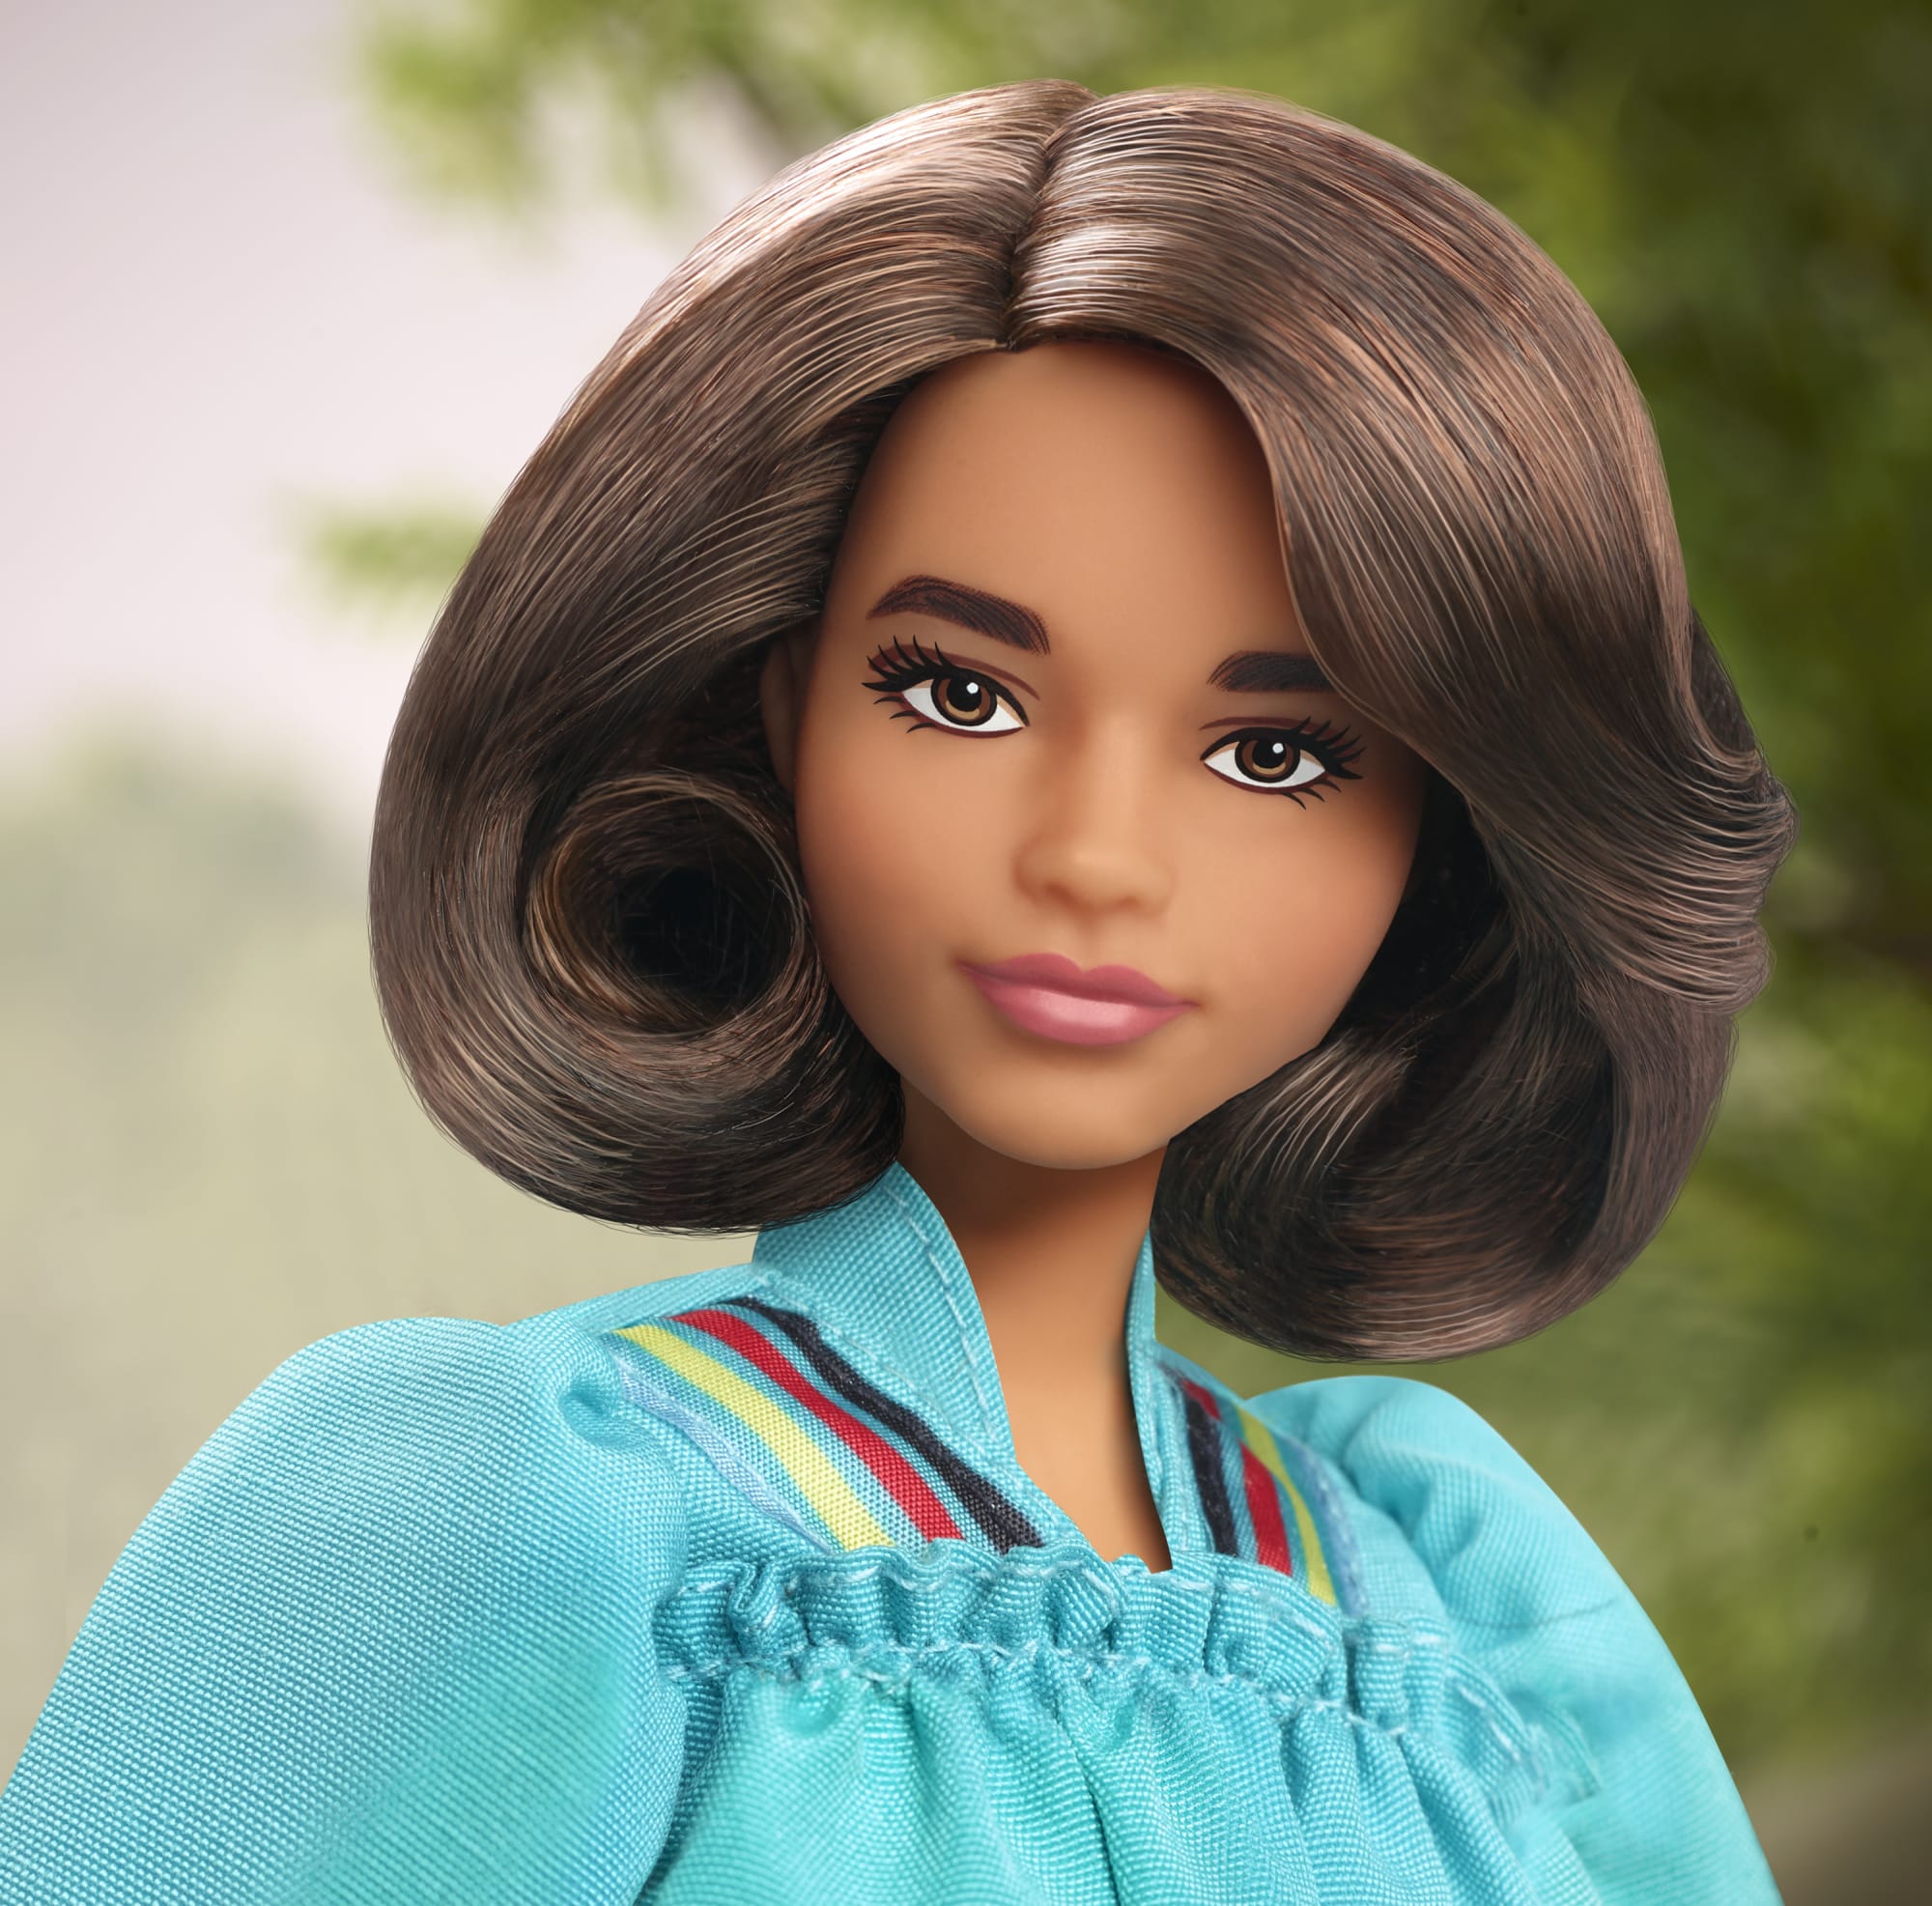 BLACK HISTORY MONTH 2023: Black Barbie dolls proudly take their